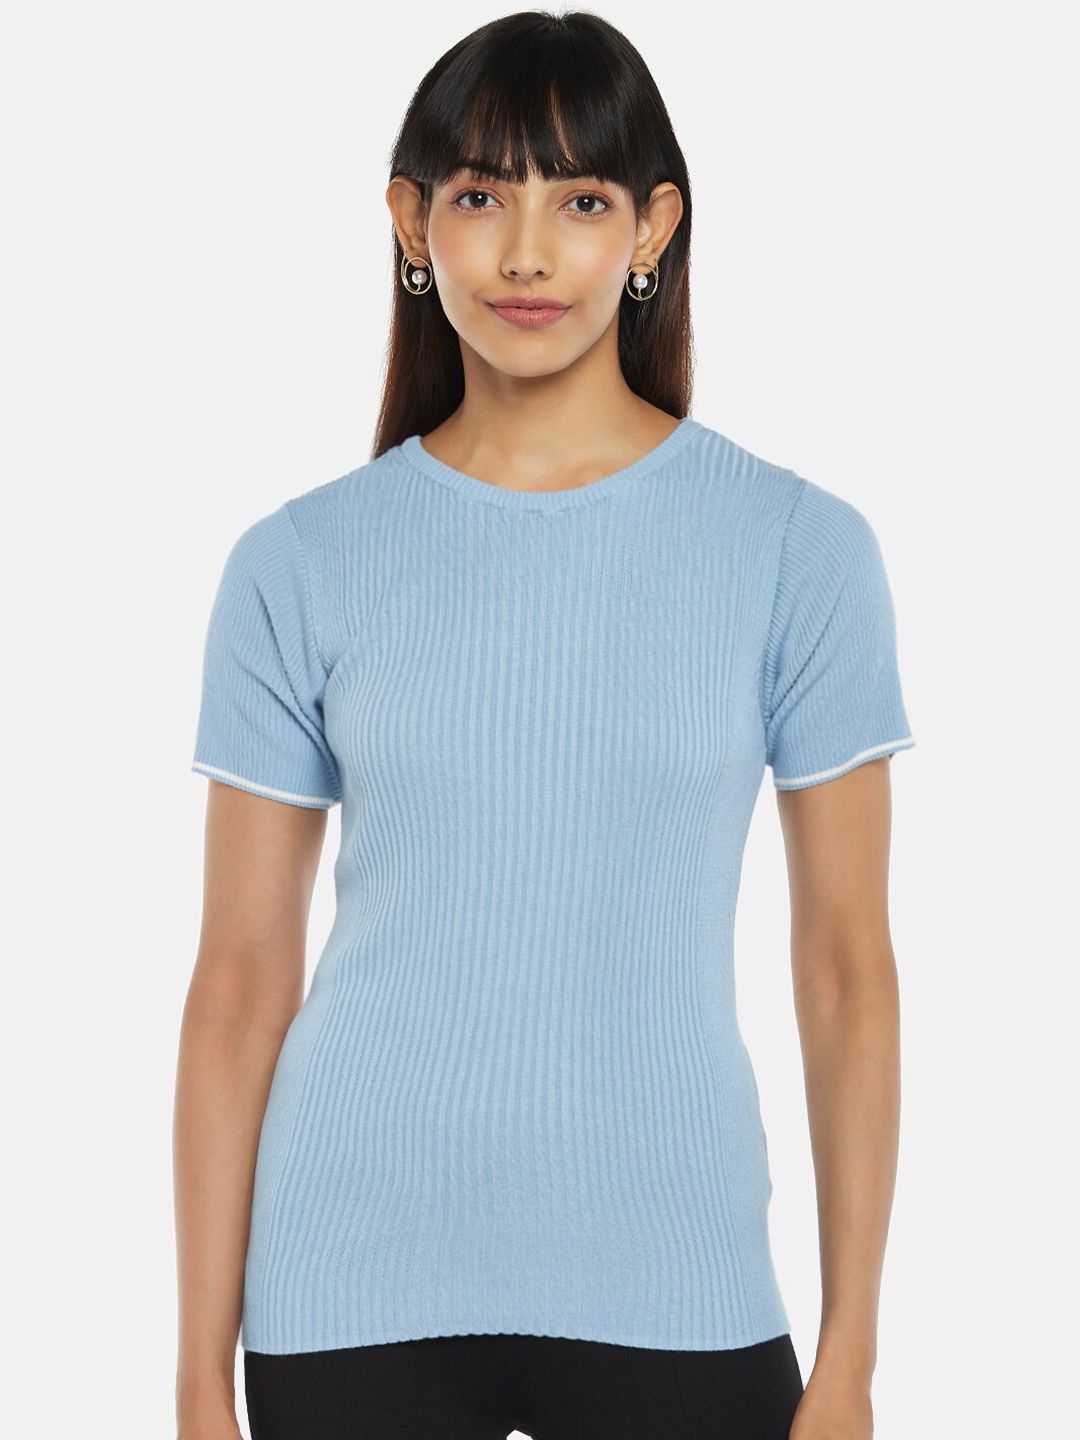 Annabelle by Pantaloons Women Blue Striped Top Price in India